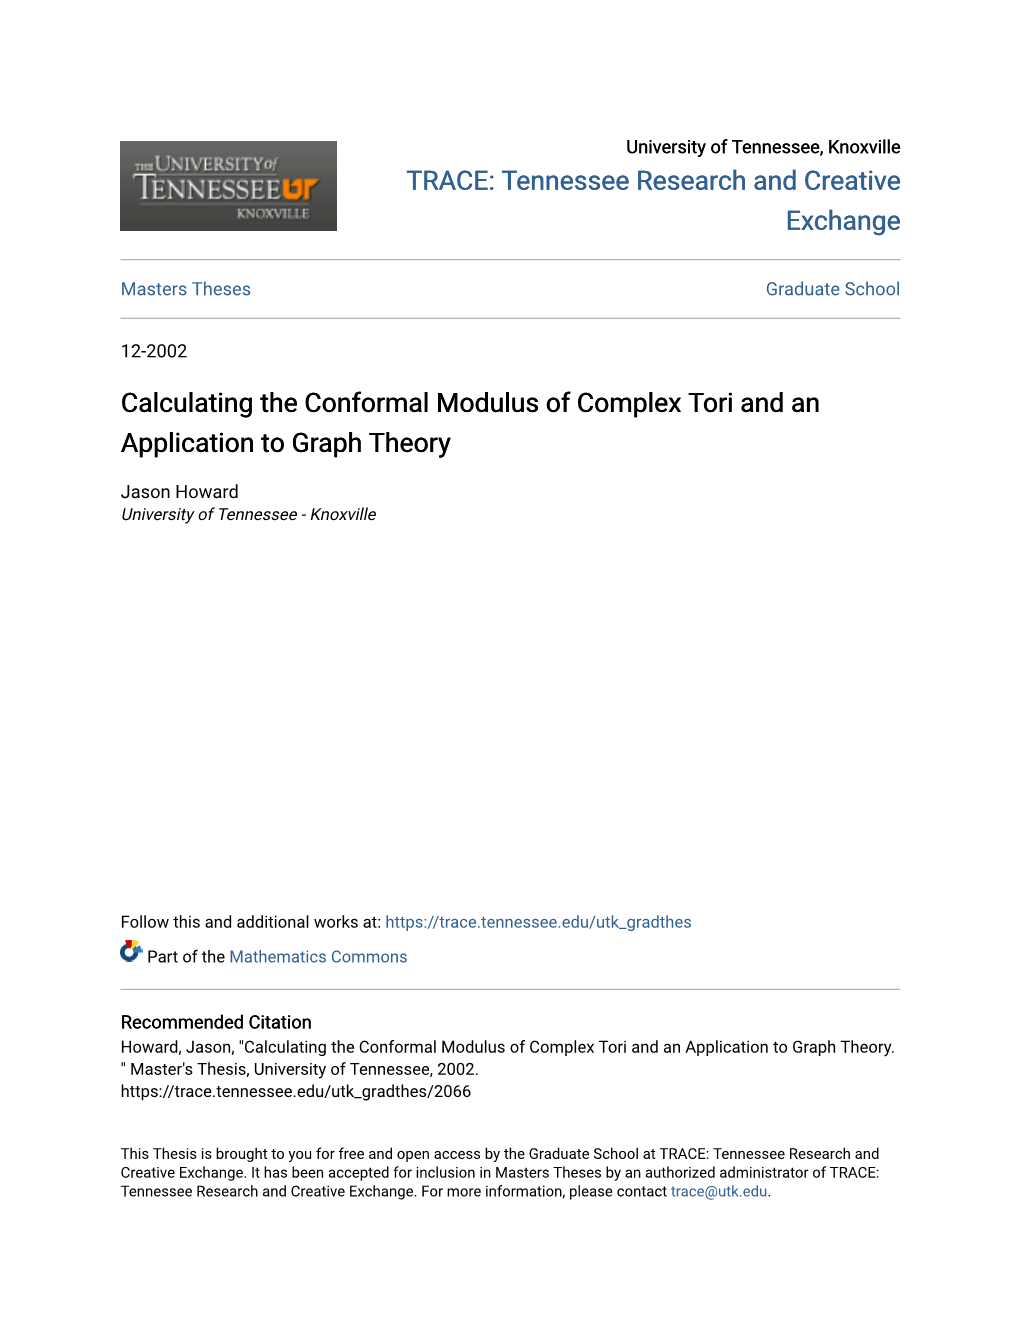 Calculating the Conformal Modulus of Complex Tori and an Application to Graph Theory